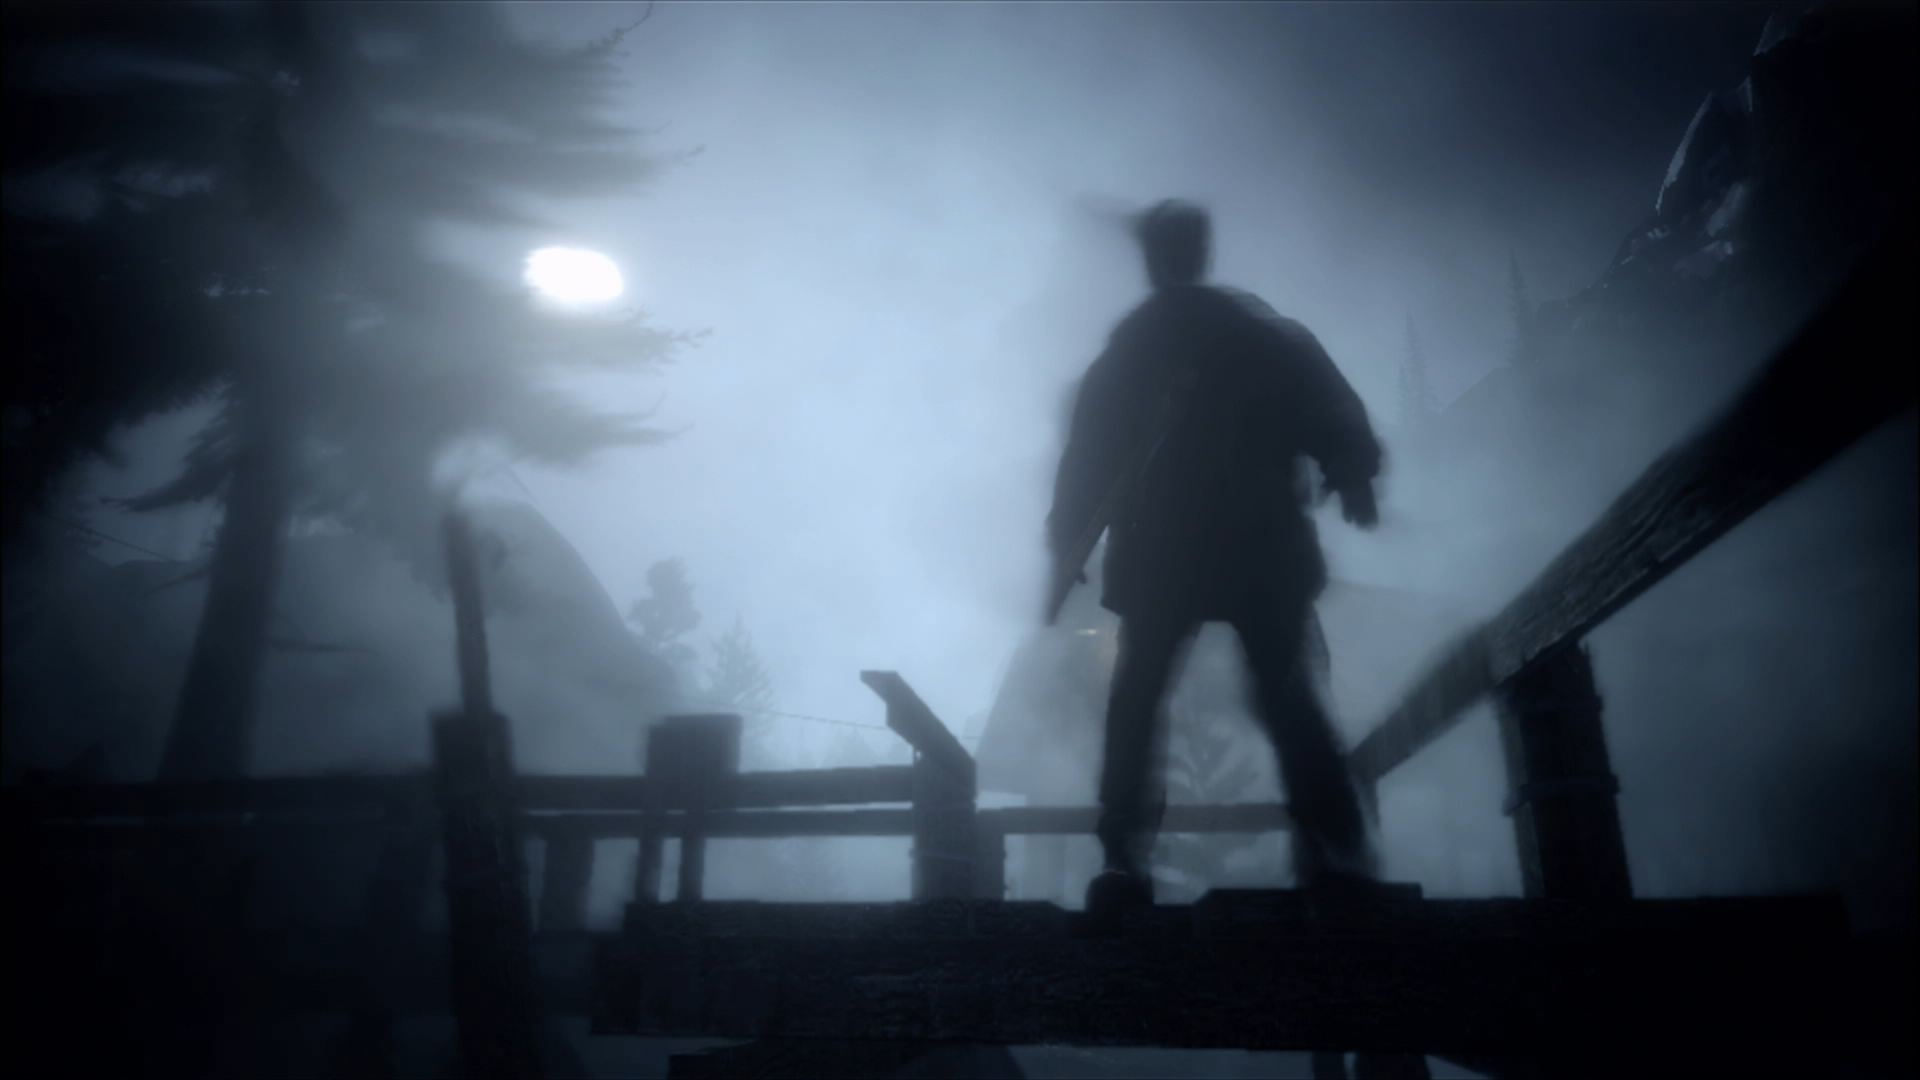 Alan Wake Remastered review: Bringing a great game back into the light